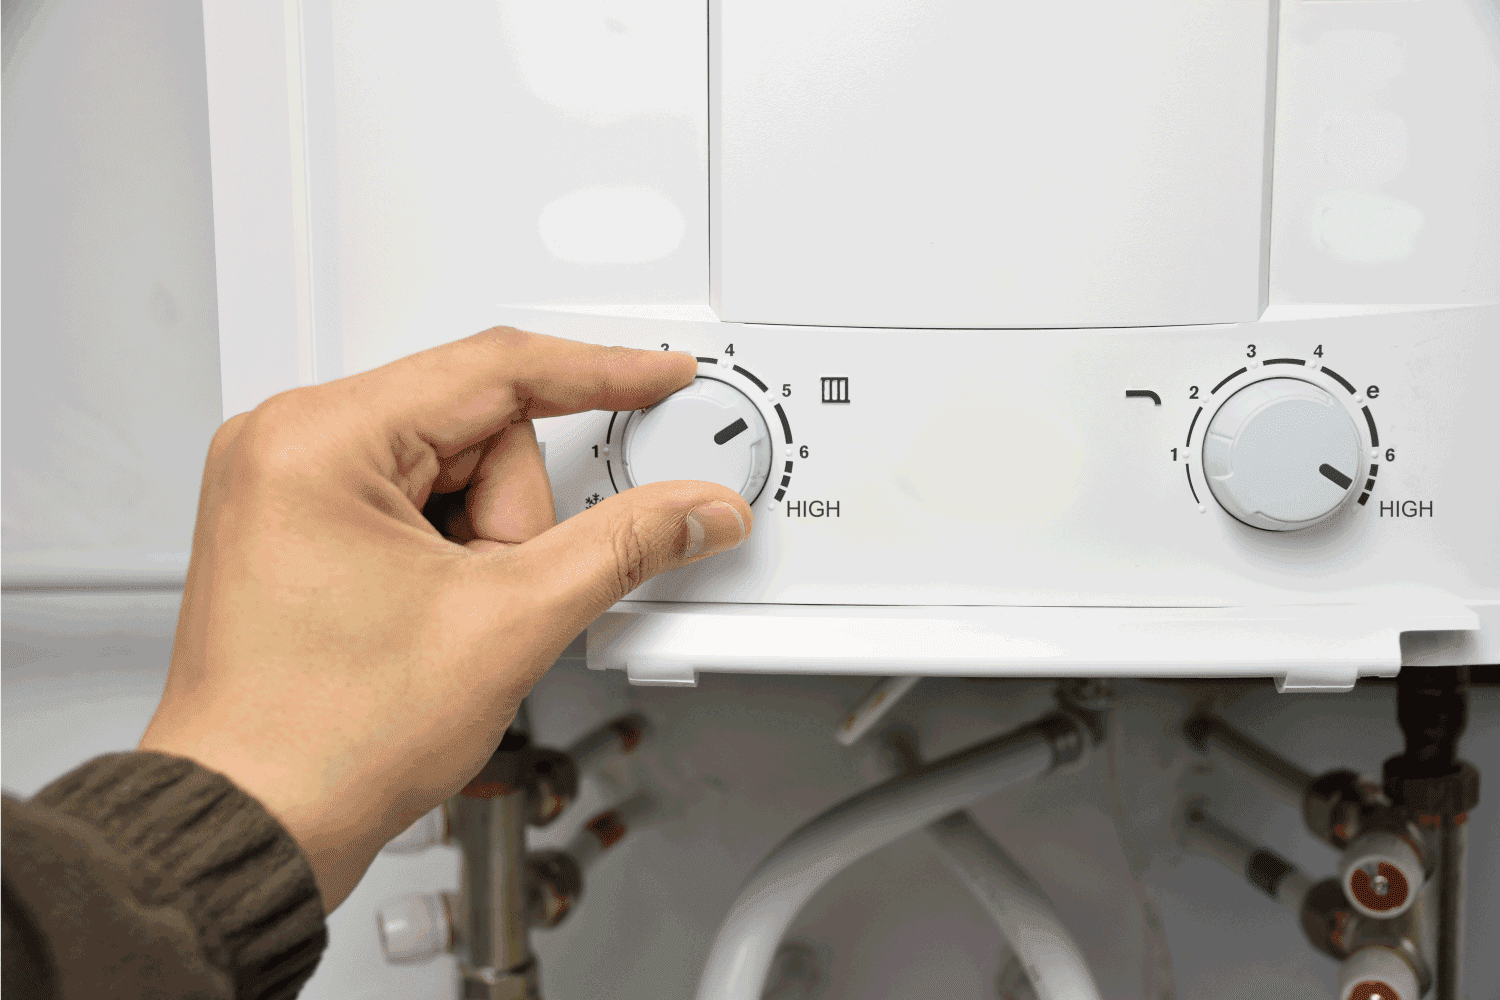 hand turning knobs of water heater at home